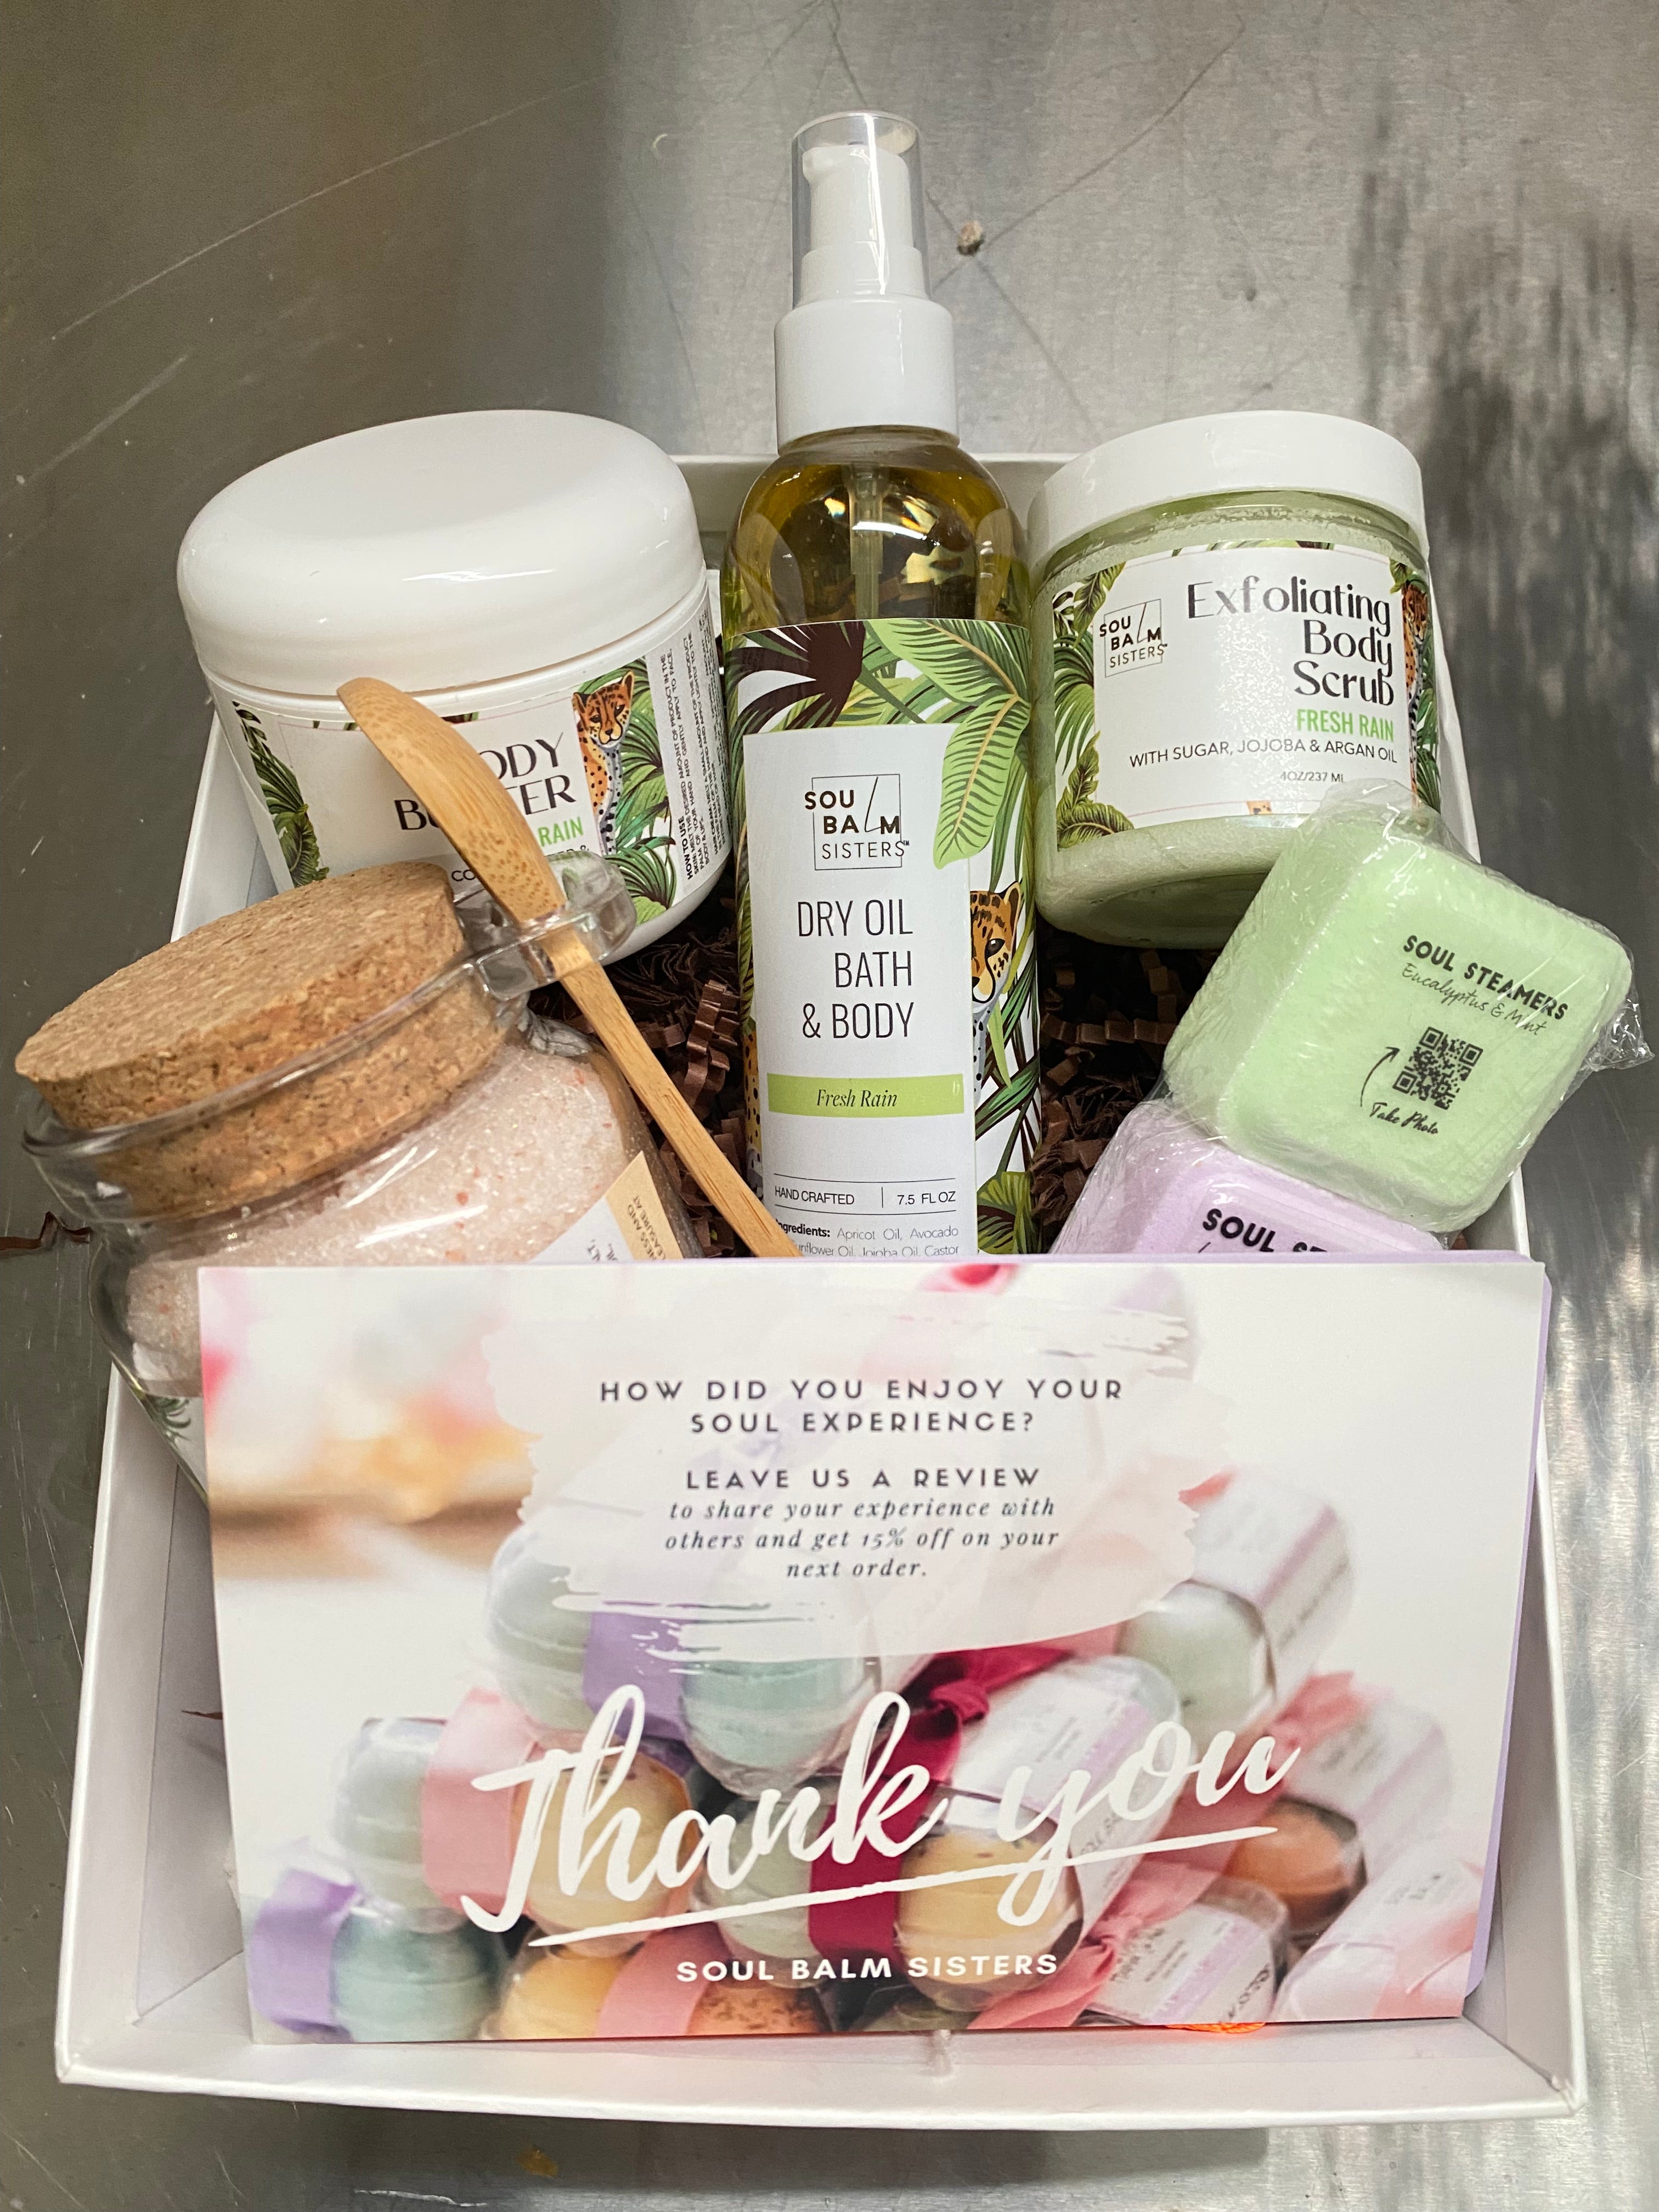 Spa Day Kit, Spa Kit for Women Gift Set, Home Spa Kit, Spa Baskets for Mothers Day, Mothers Day Relaxation Gifts, at Home Spa Package, Pampering